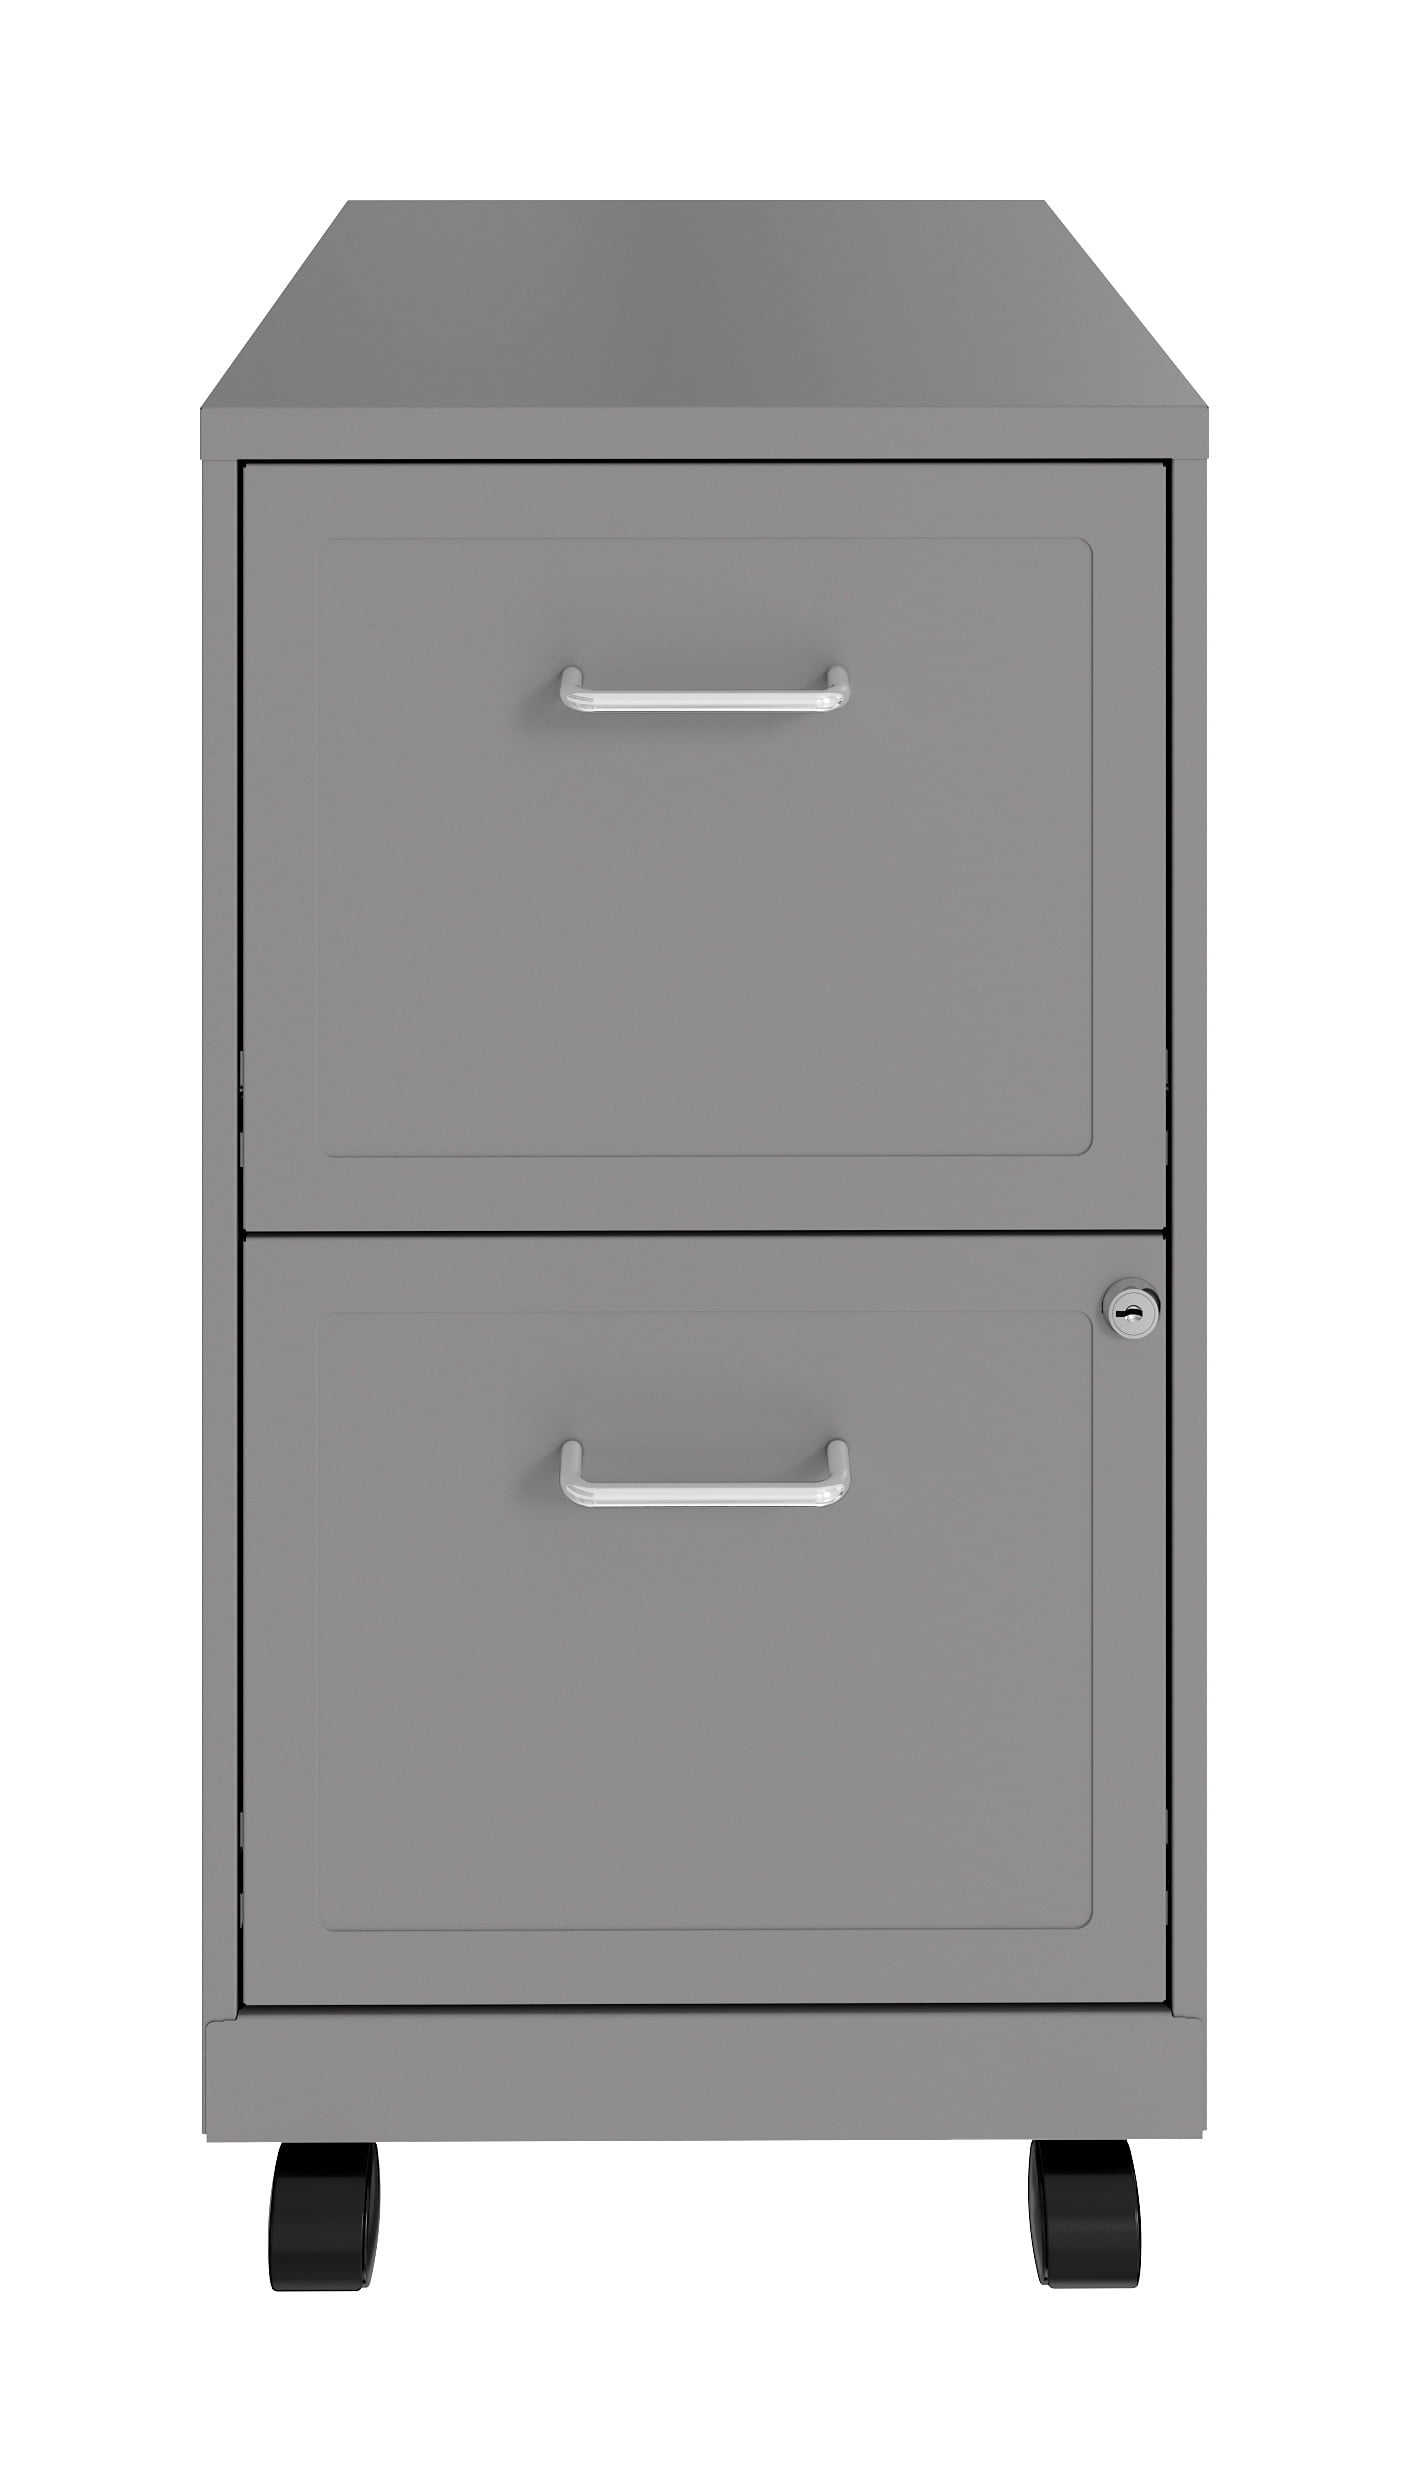 Lorell Space Solutions 18" 2 Drawer Mobile Vertical File Cabinet in Silver - image 13 of 15